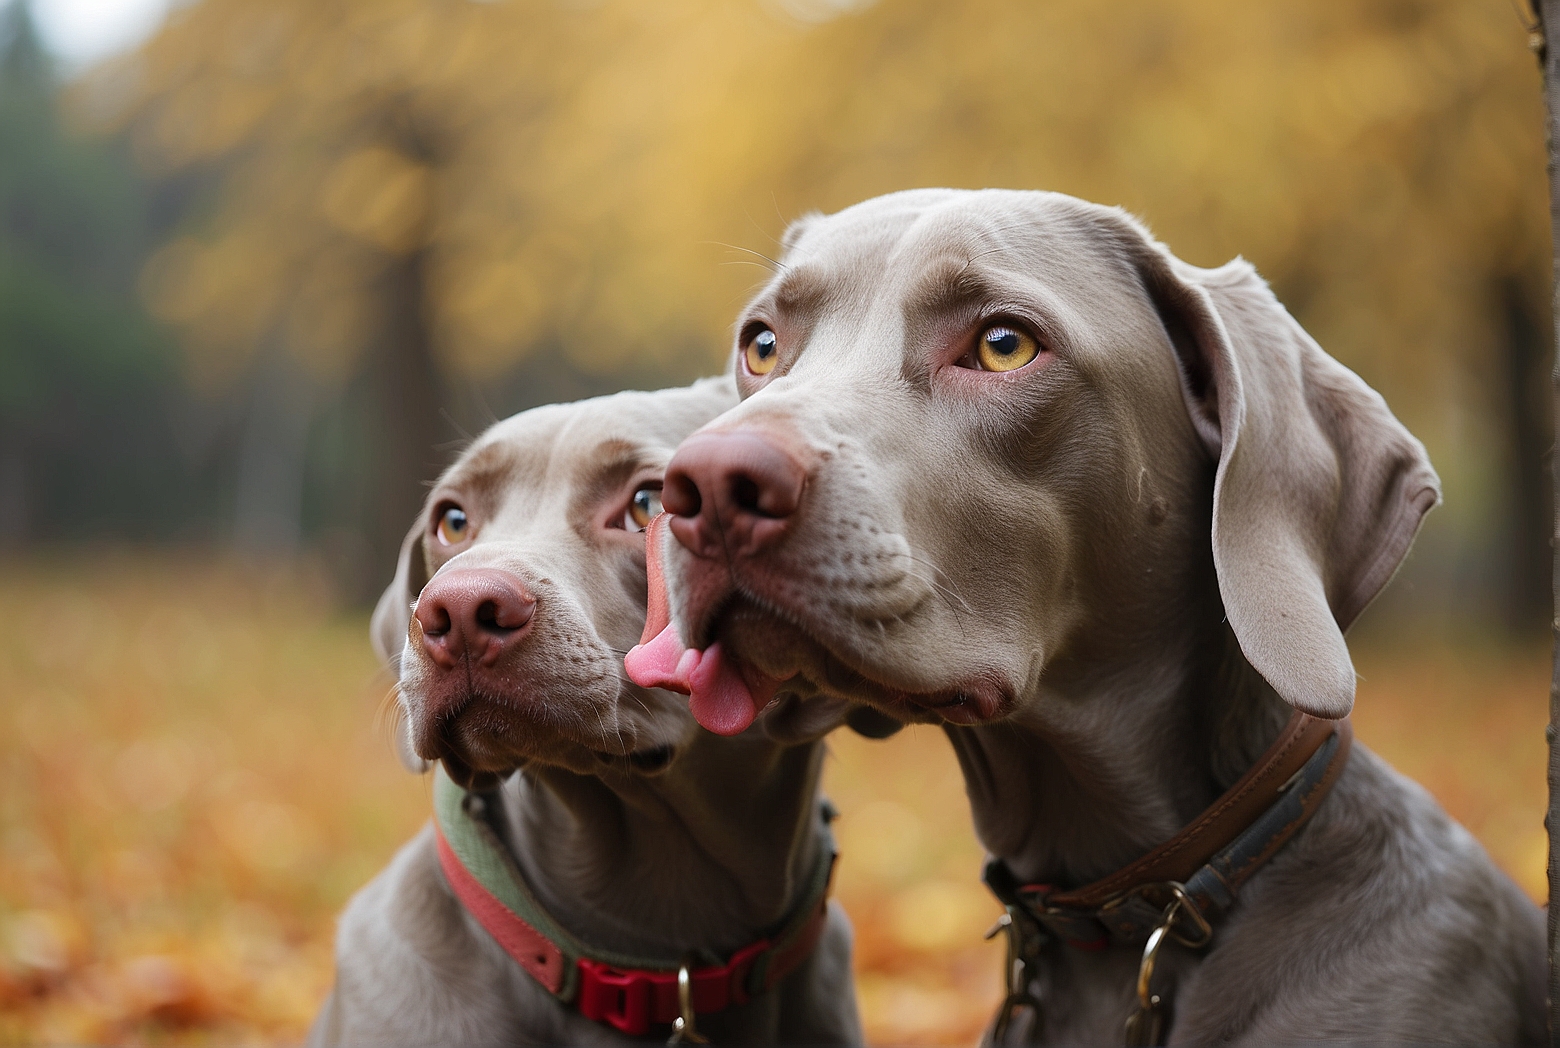 Why Does My Weimaraner Lick Me Constantly?